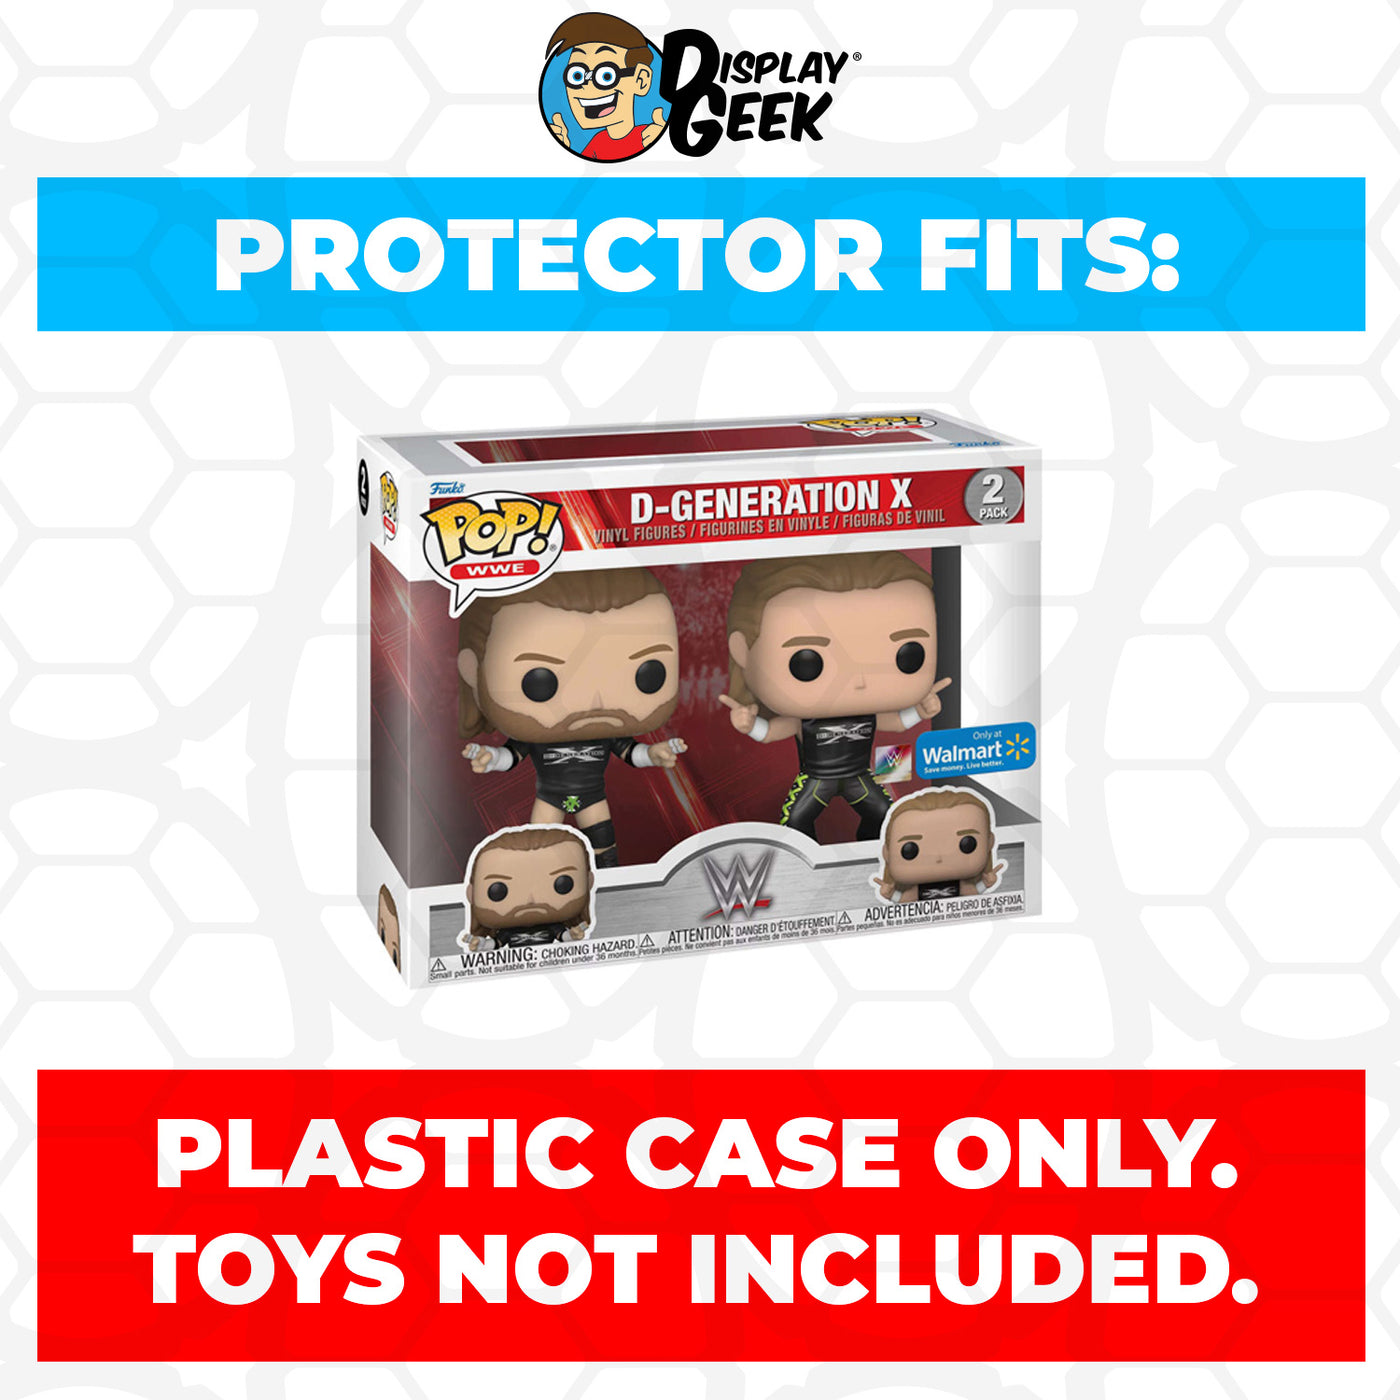 Pop Protector for 2 Pack D-Generation X Funko Pop on The Protector Guide App by Display Geek